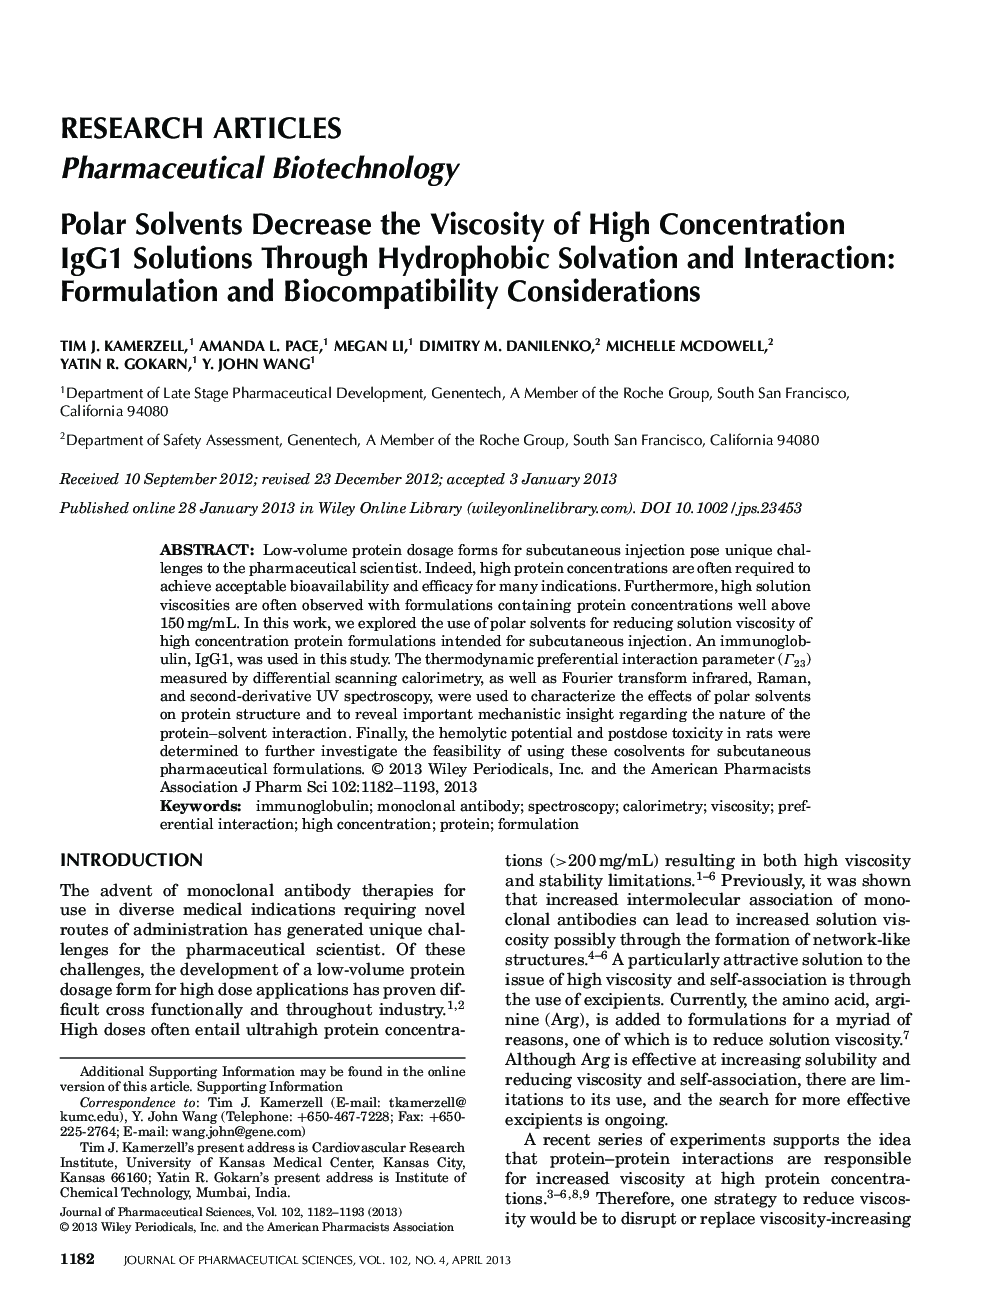 Polar Solvents Decrease the Viscosity of High Concentration IgG1 Solutions Through Hydrophobic Solvation and Interaction: Formulation and Biocompatibility Considerations